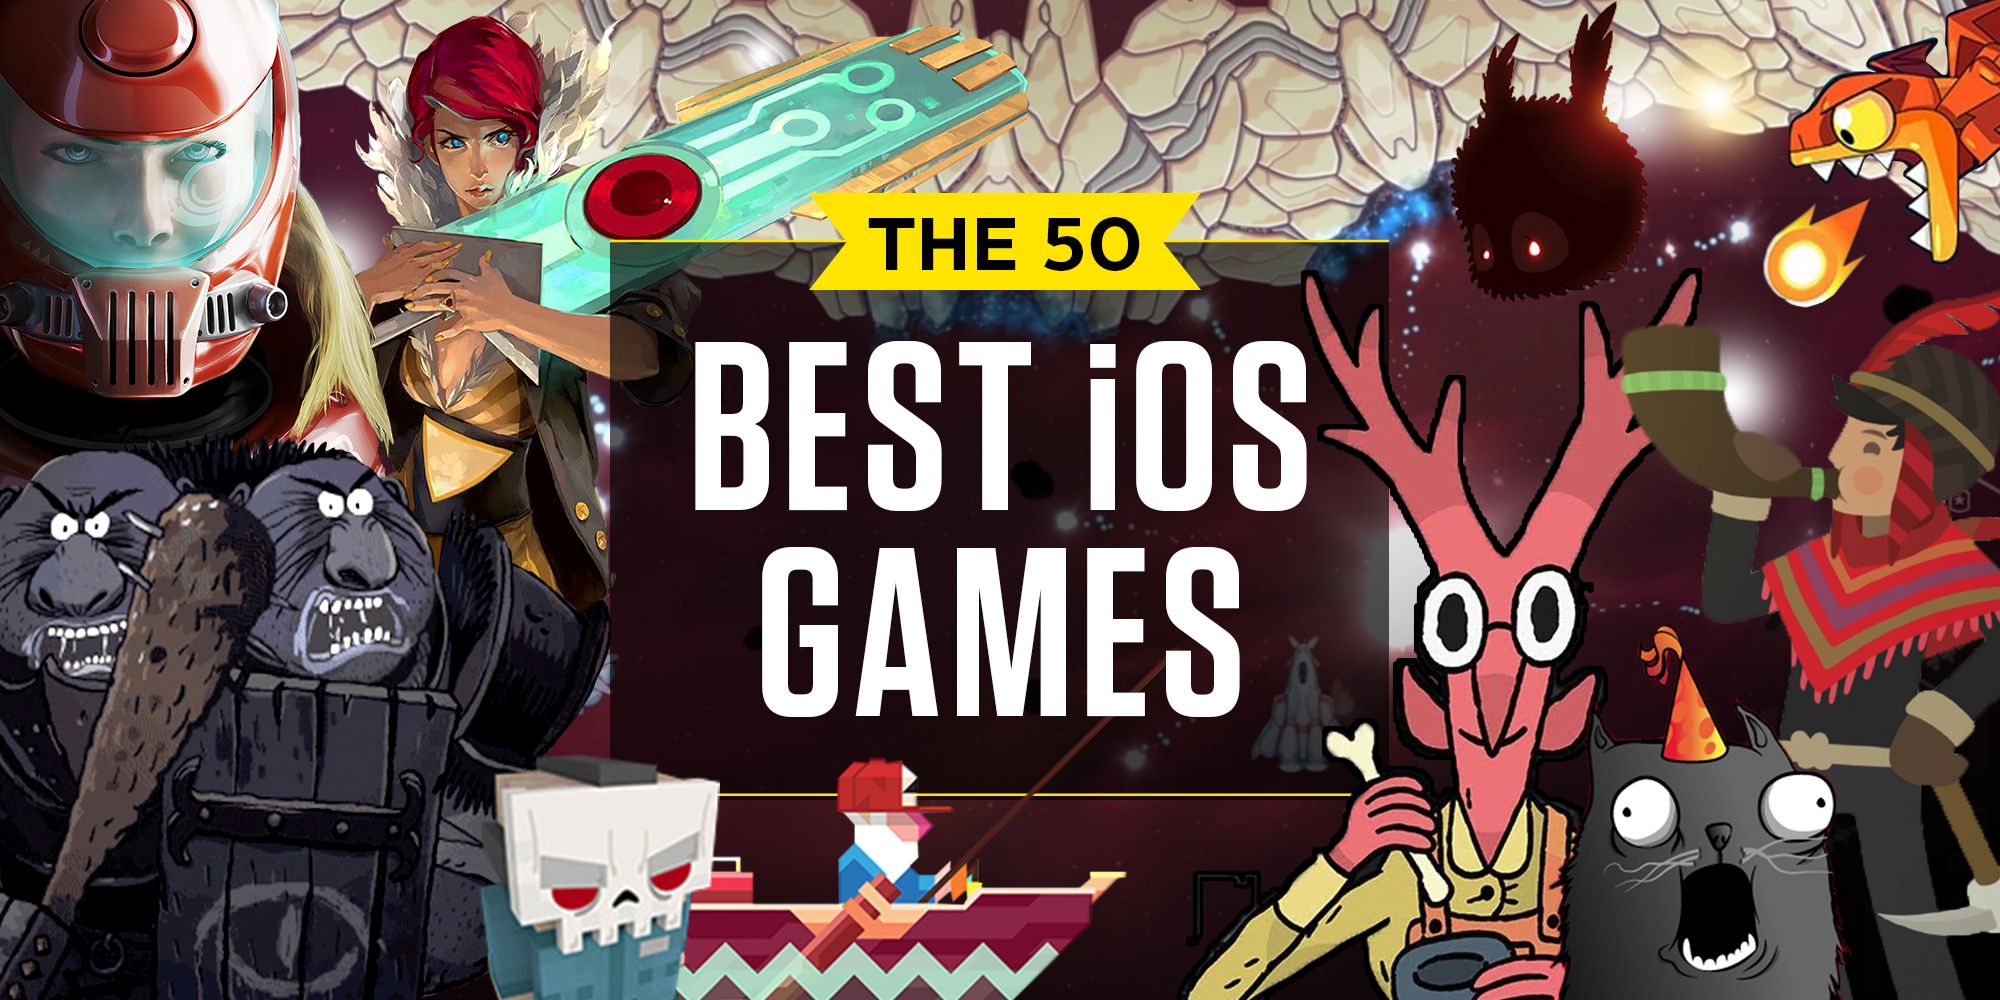 Top 10 BEST Games OFFLINE  ONLINE Games on Android Games we must  Anticipated and play now   Bilibili